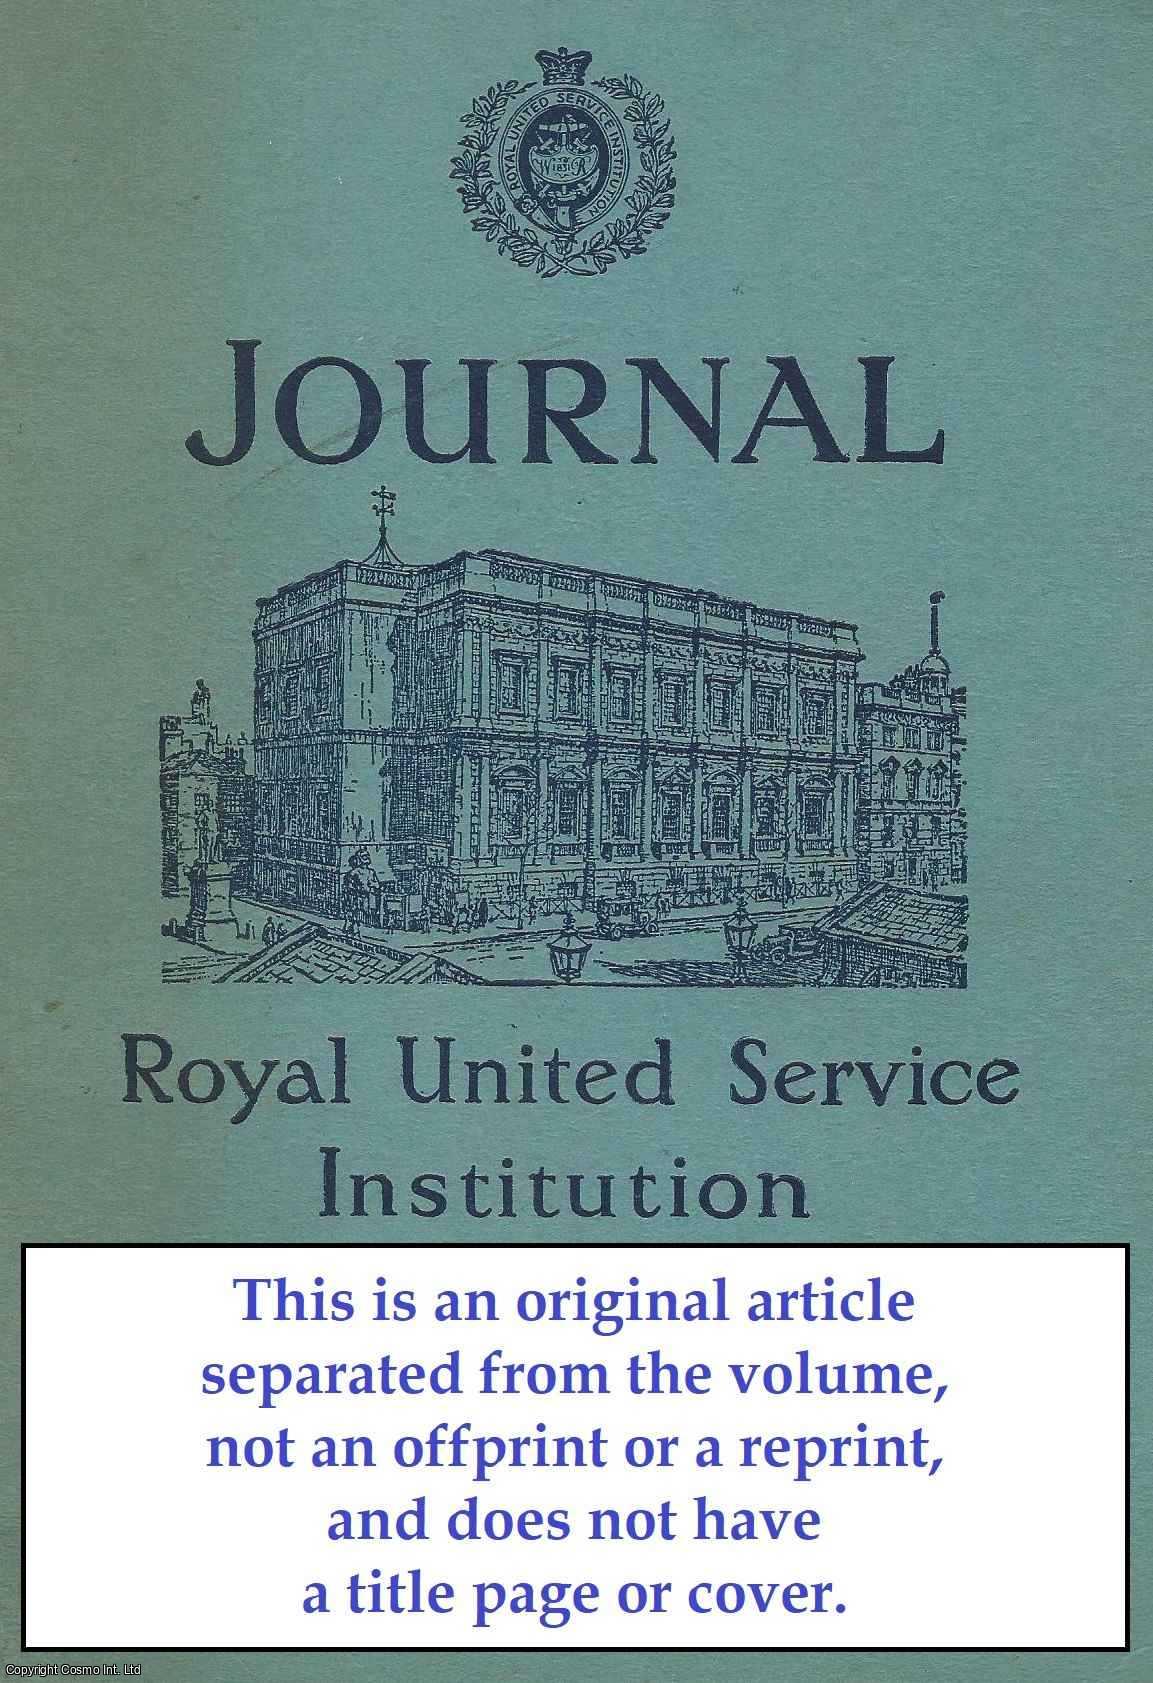 Richard Goold-Adams - The Organization of Defence. An original article from Journal of The Royal United Service Institution, 1960.